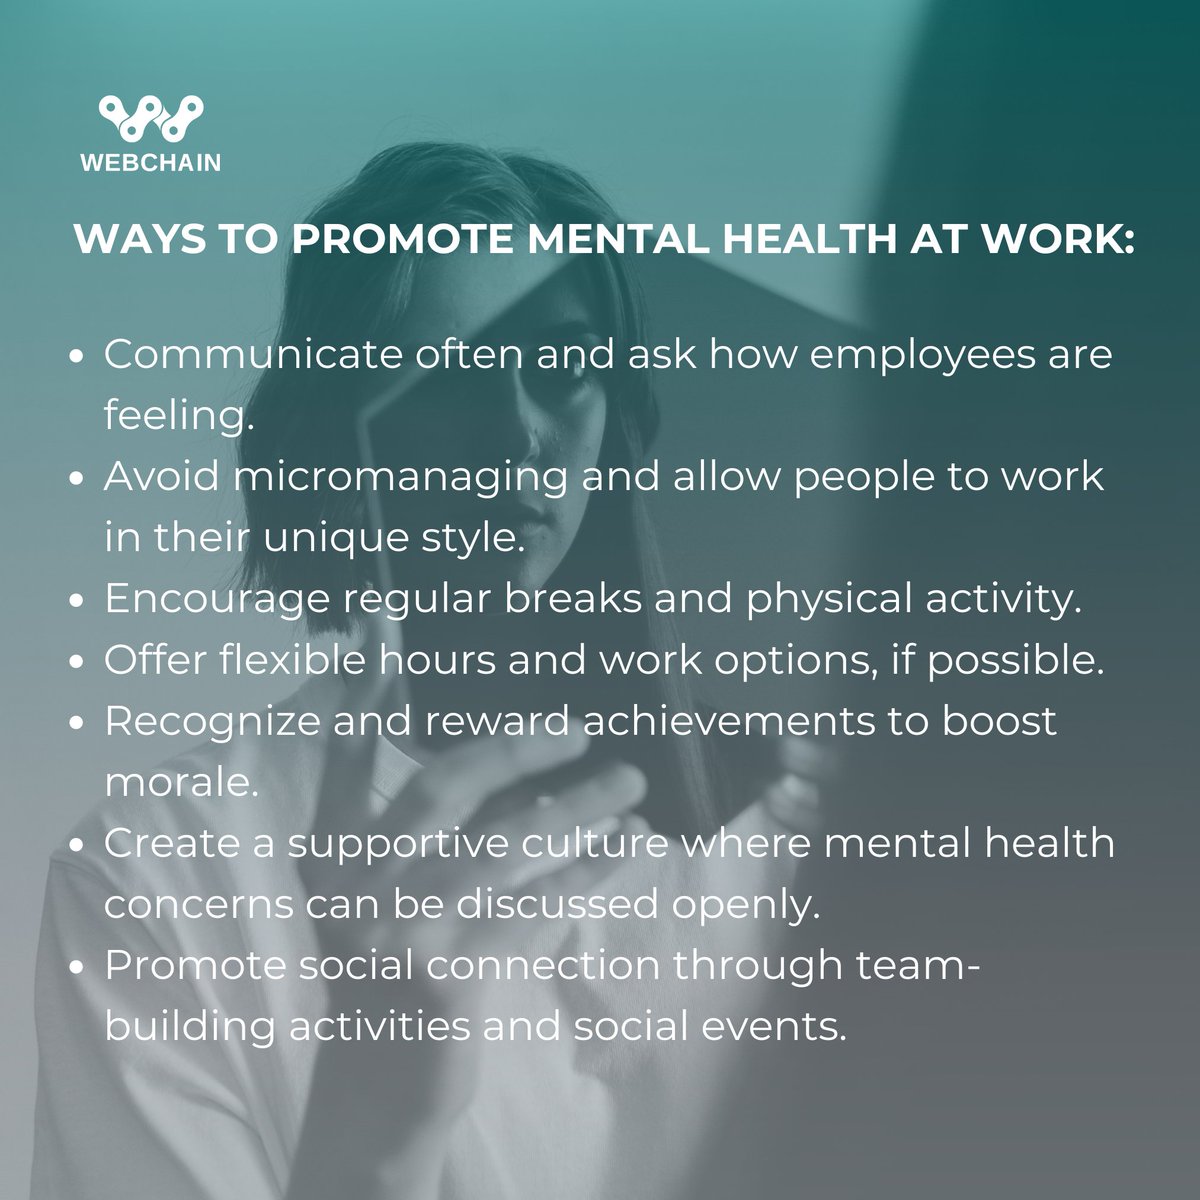 Just remember: when we prioritize self-care, we improve our ability to succeed at work and achieve a healthy work-life balance. ✨ #MentalHealthAwarenessMonth 

#MentalHealthAwareness #MentalHealthMatters #WorkLifeBalance #webchainromania #SoftwareDevelopment